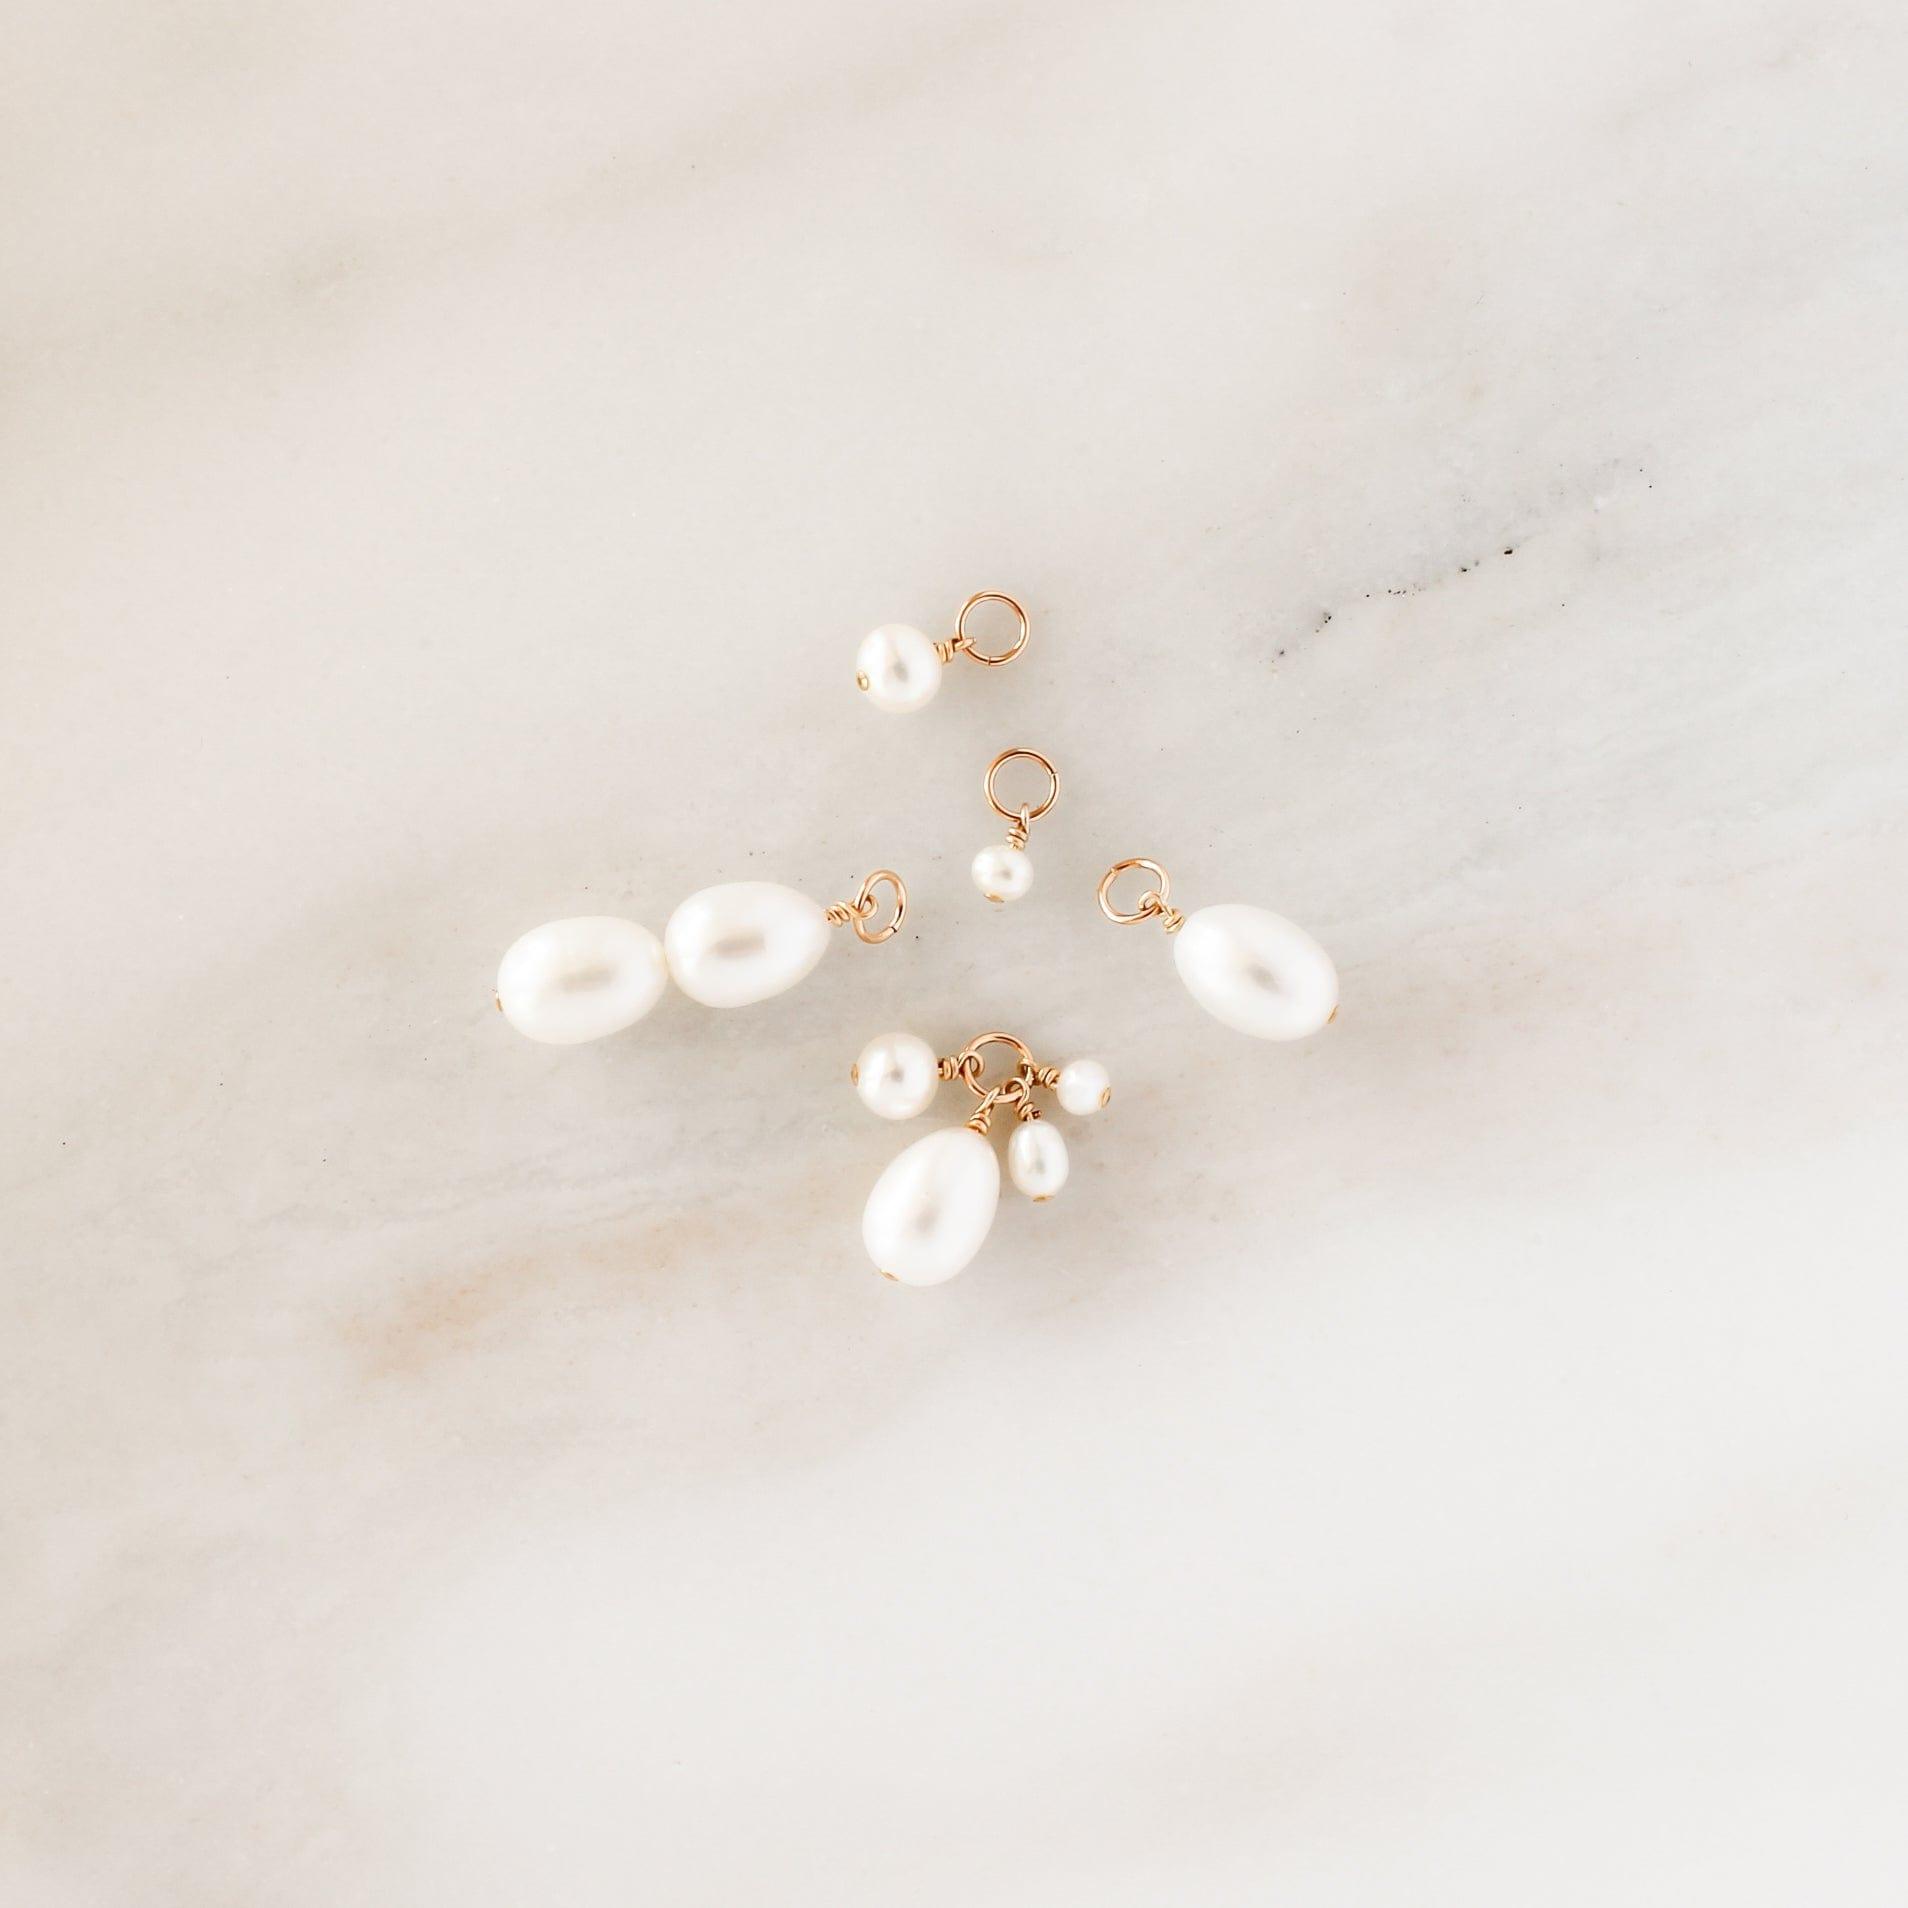 Viv Pearl Charm • Add On - Nolia Jewelry - Meaningful + Sustainably Handcrafted Jewelry